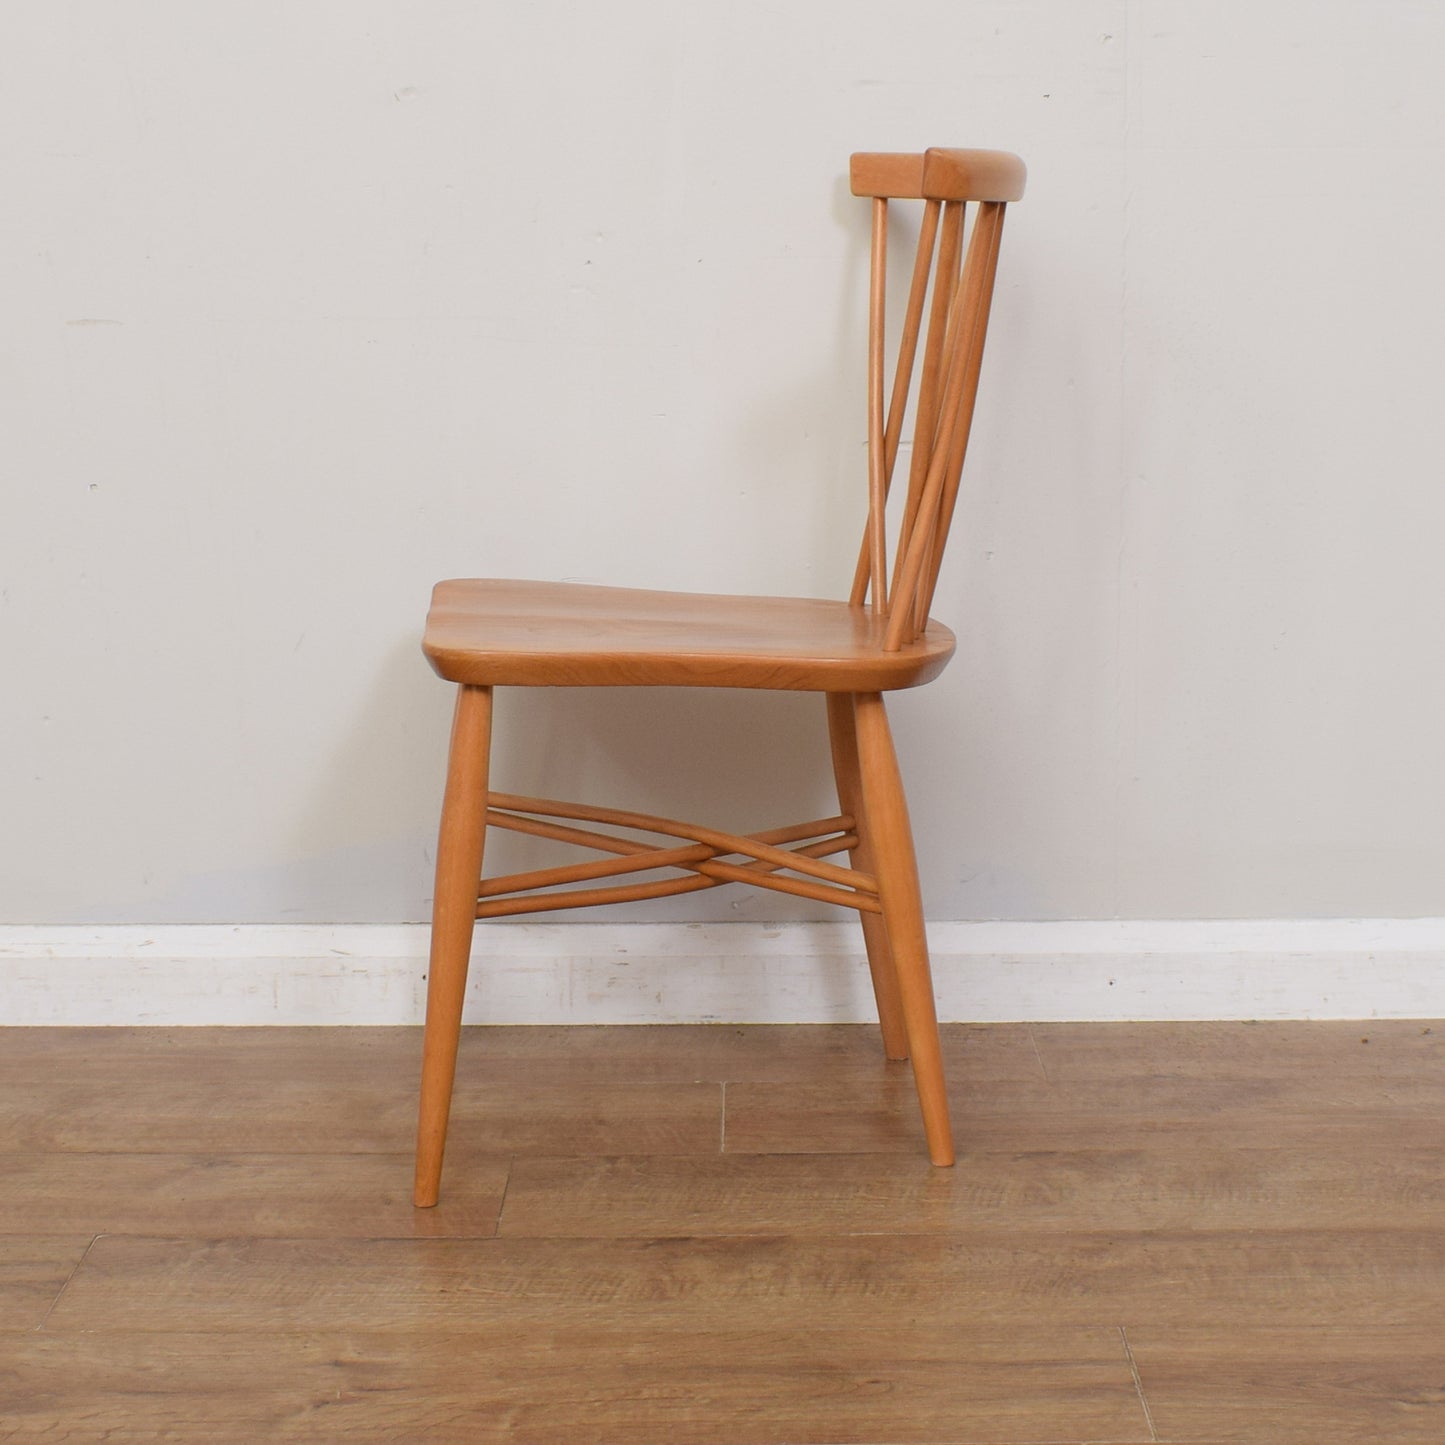 Ercol Windsor Plank Table And Six Chairs